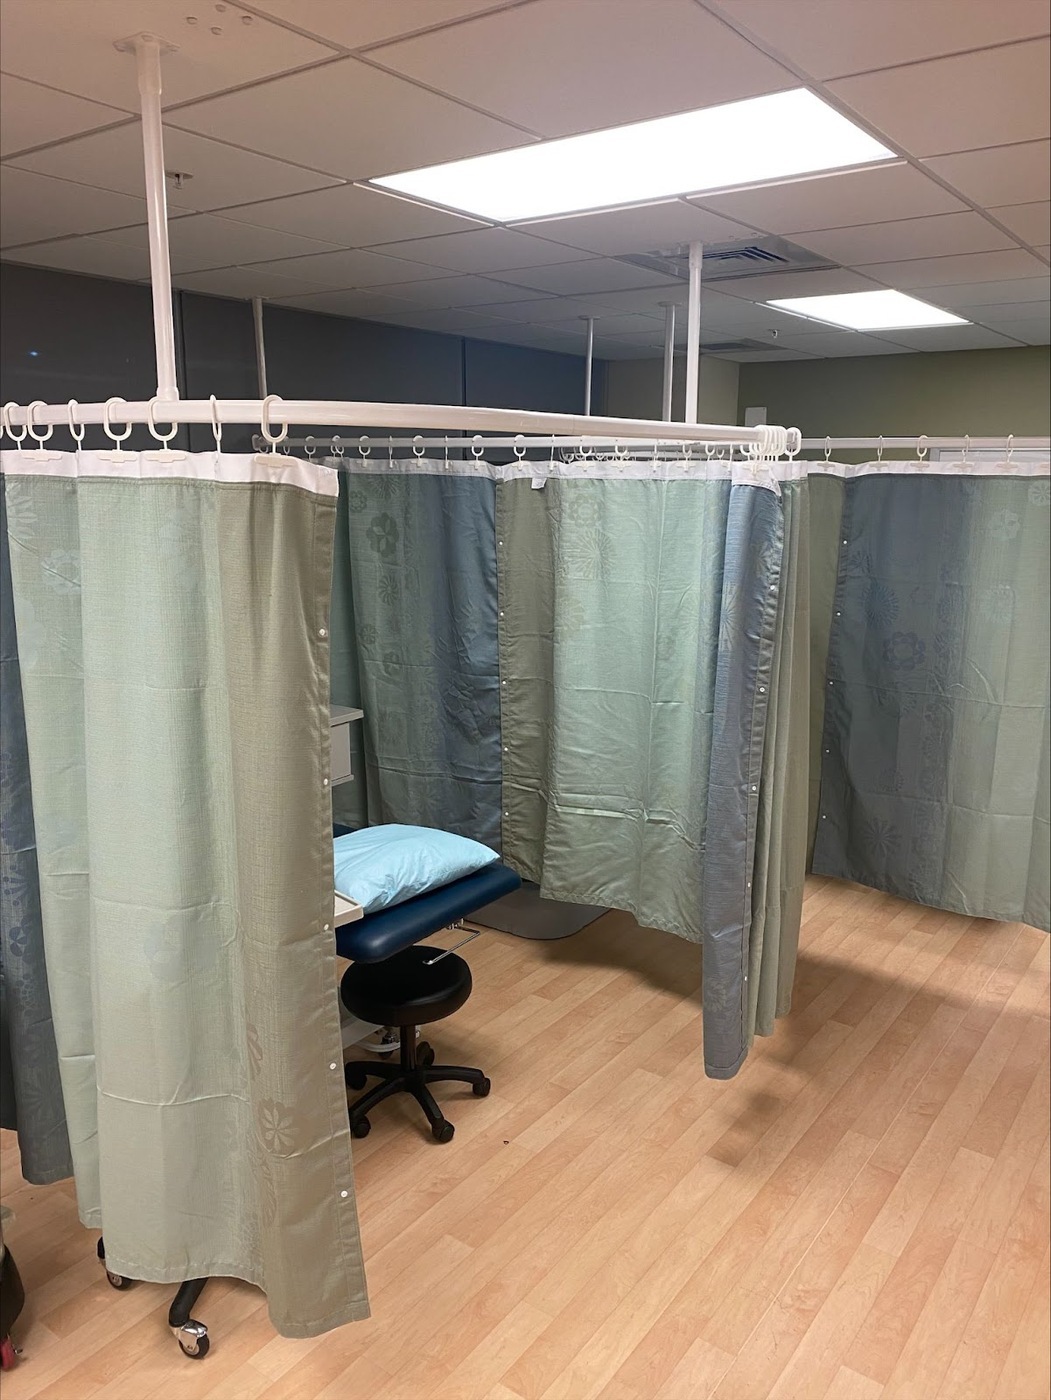 PRVC Systems™ is an American brand best known for its all-new PRVC systems for cubicle and shower curtains